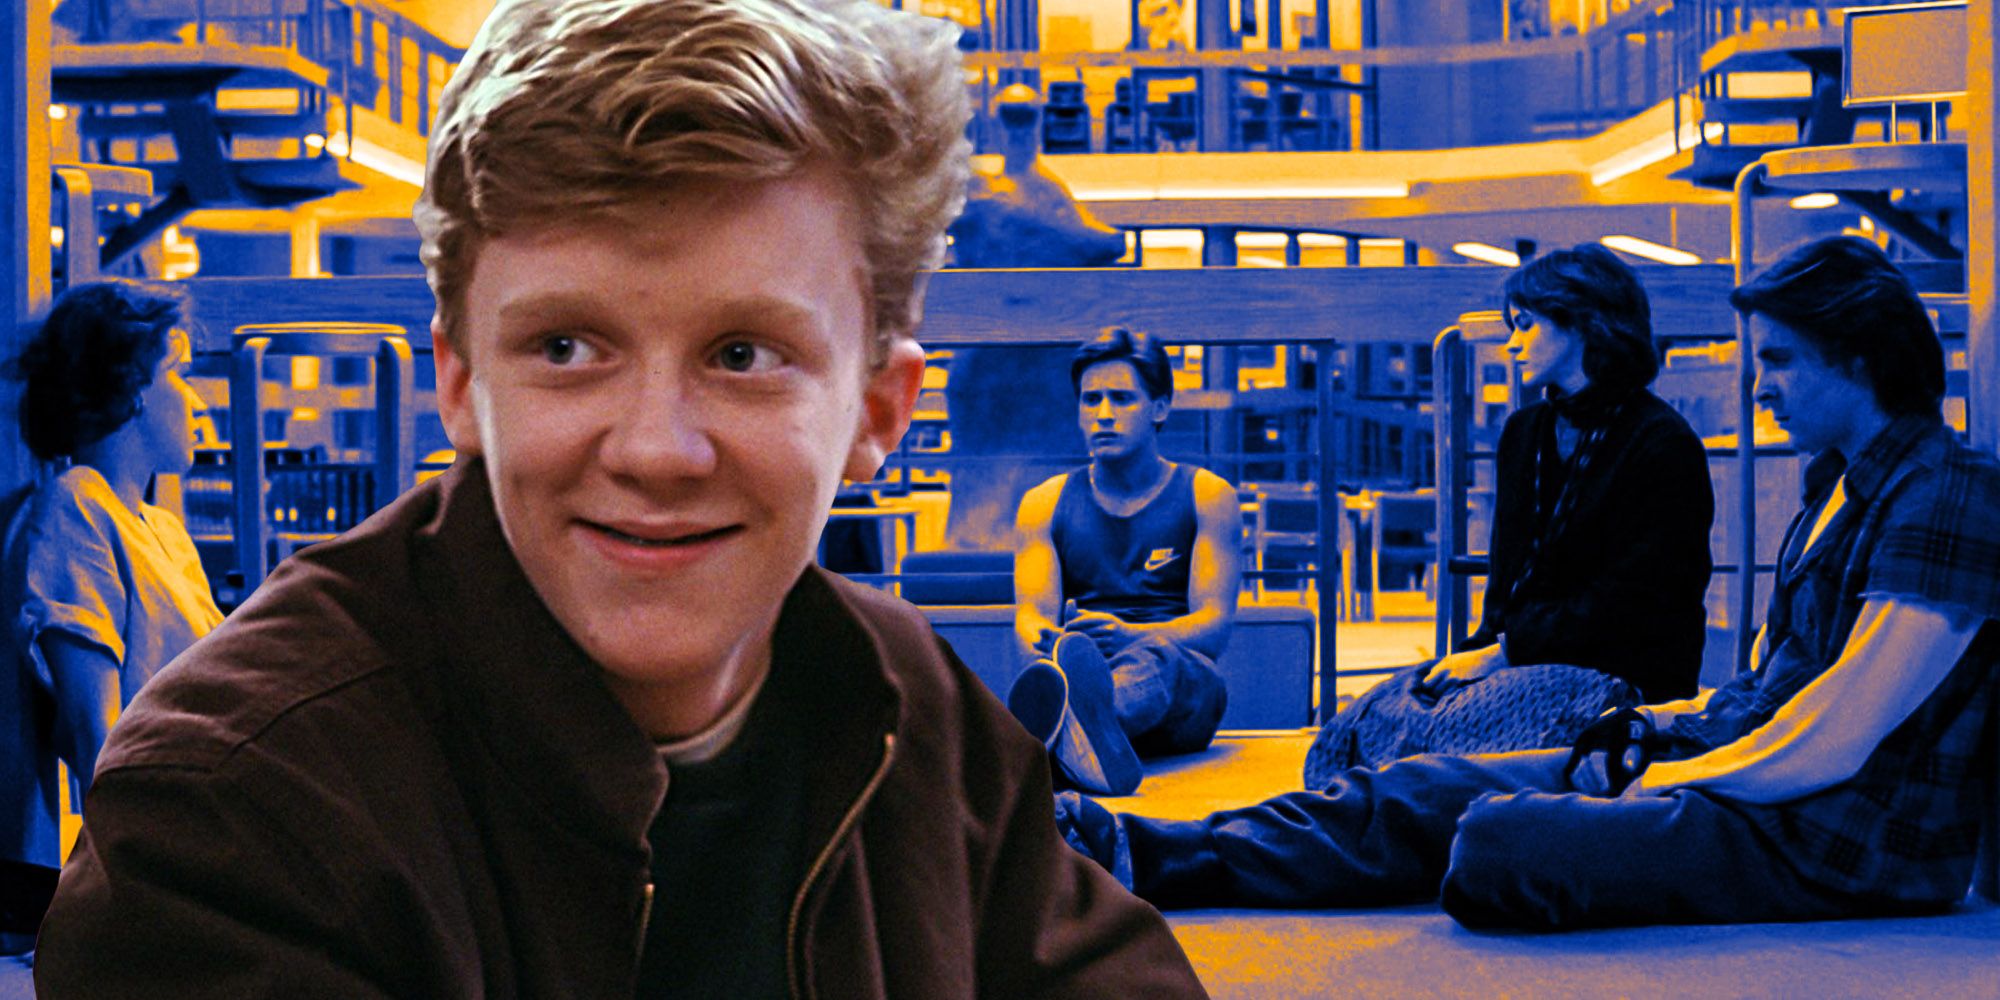 A closeup of Brian in front of a colorized image of the rest of the group in The Breakfast Club